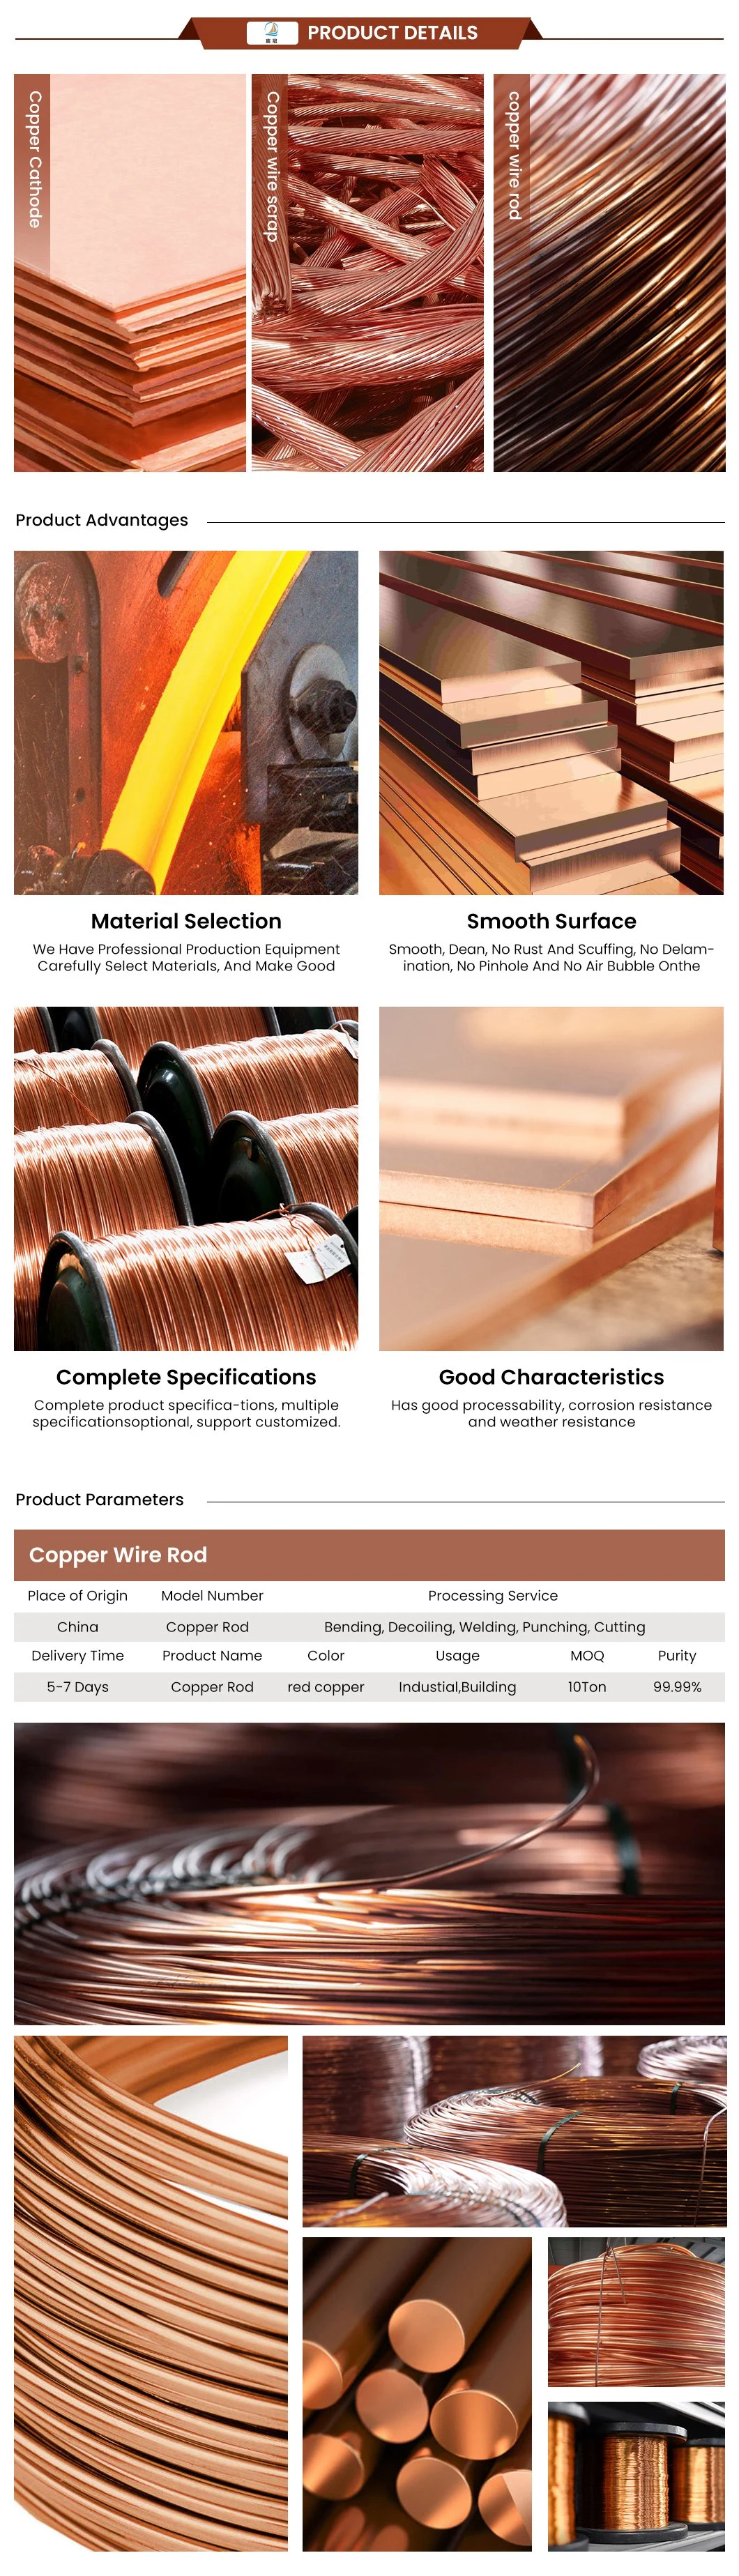 Metal Materials Pure Copper Cathode Recommended Product From This Supplier. Factory Price Copper Cathodes Plates Sheet/ Copper Cathode Cu 99.99% Copper for Sale